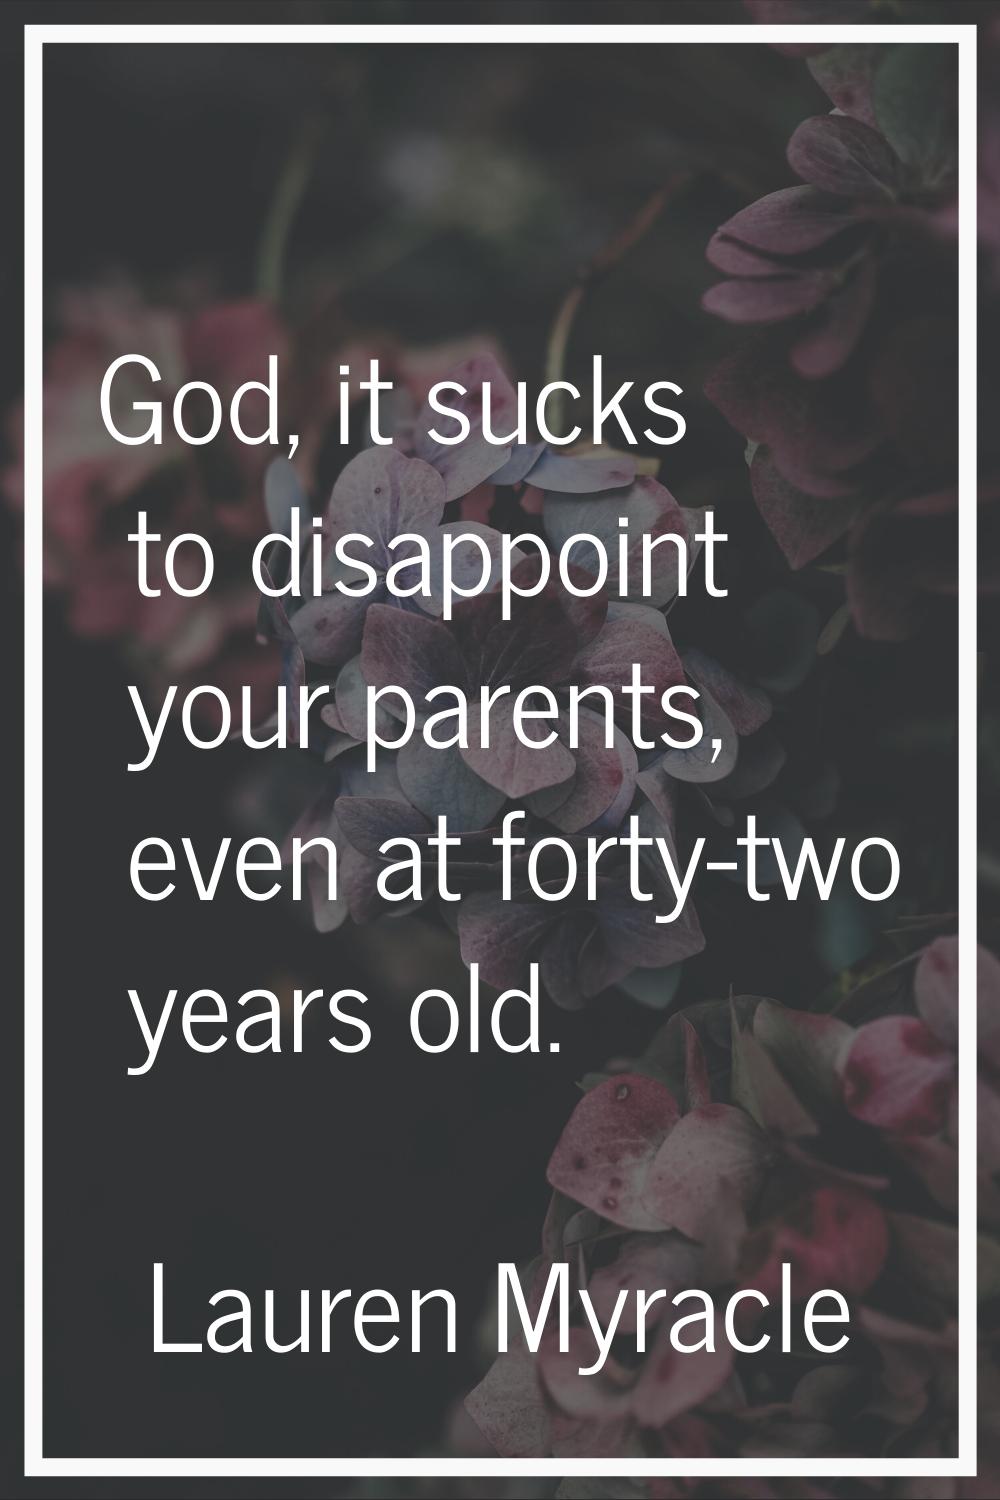 God, it sucks to disappoint your parents, even at forty-two years old.